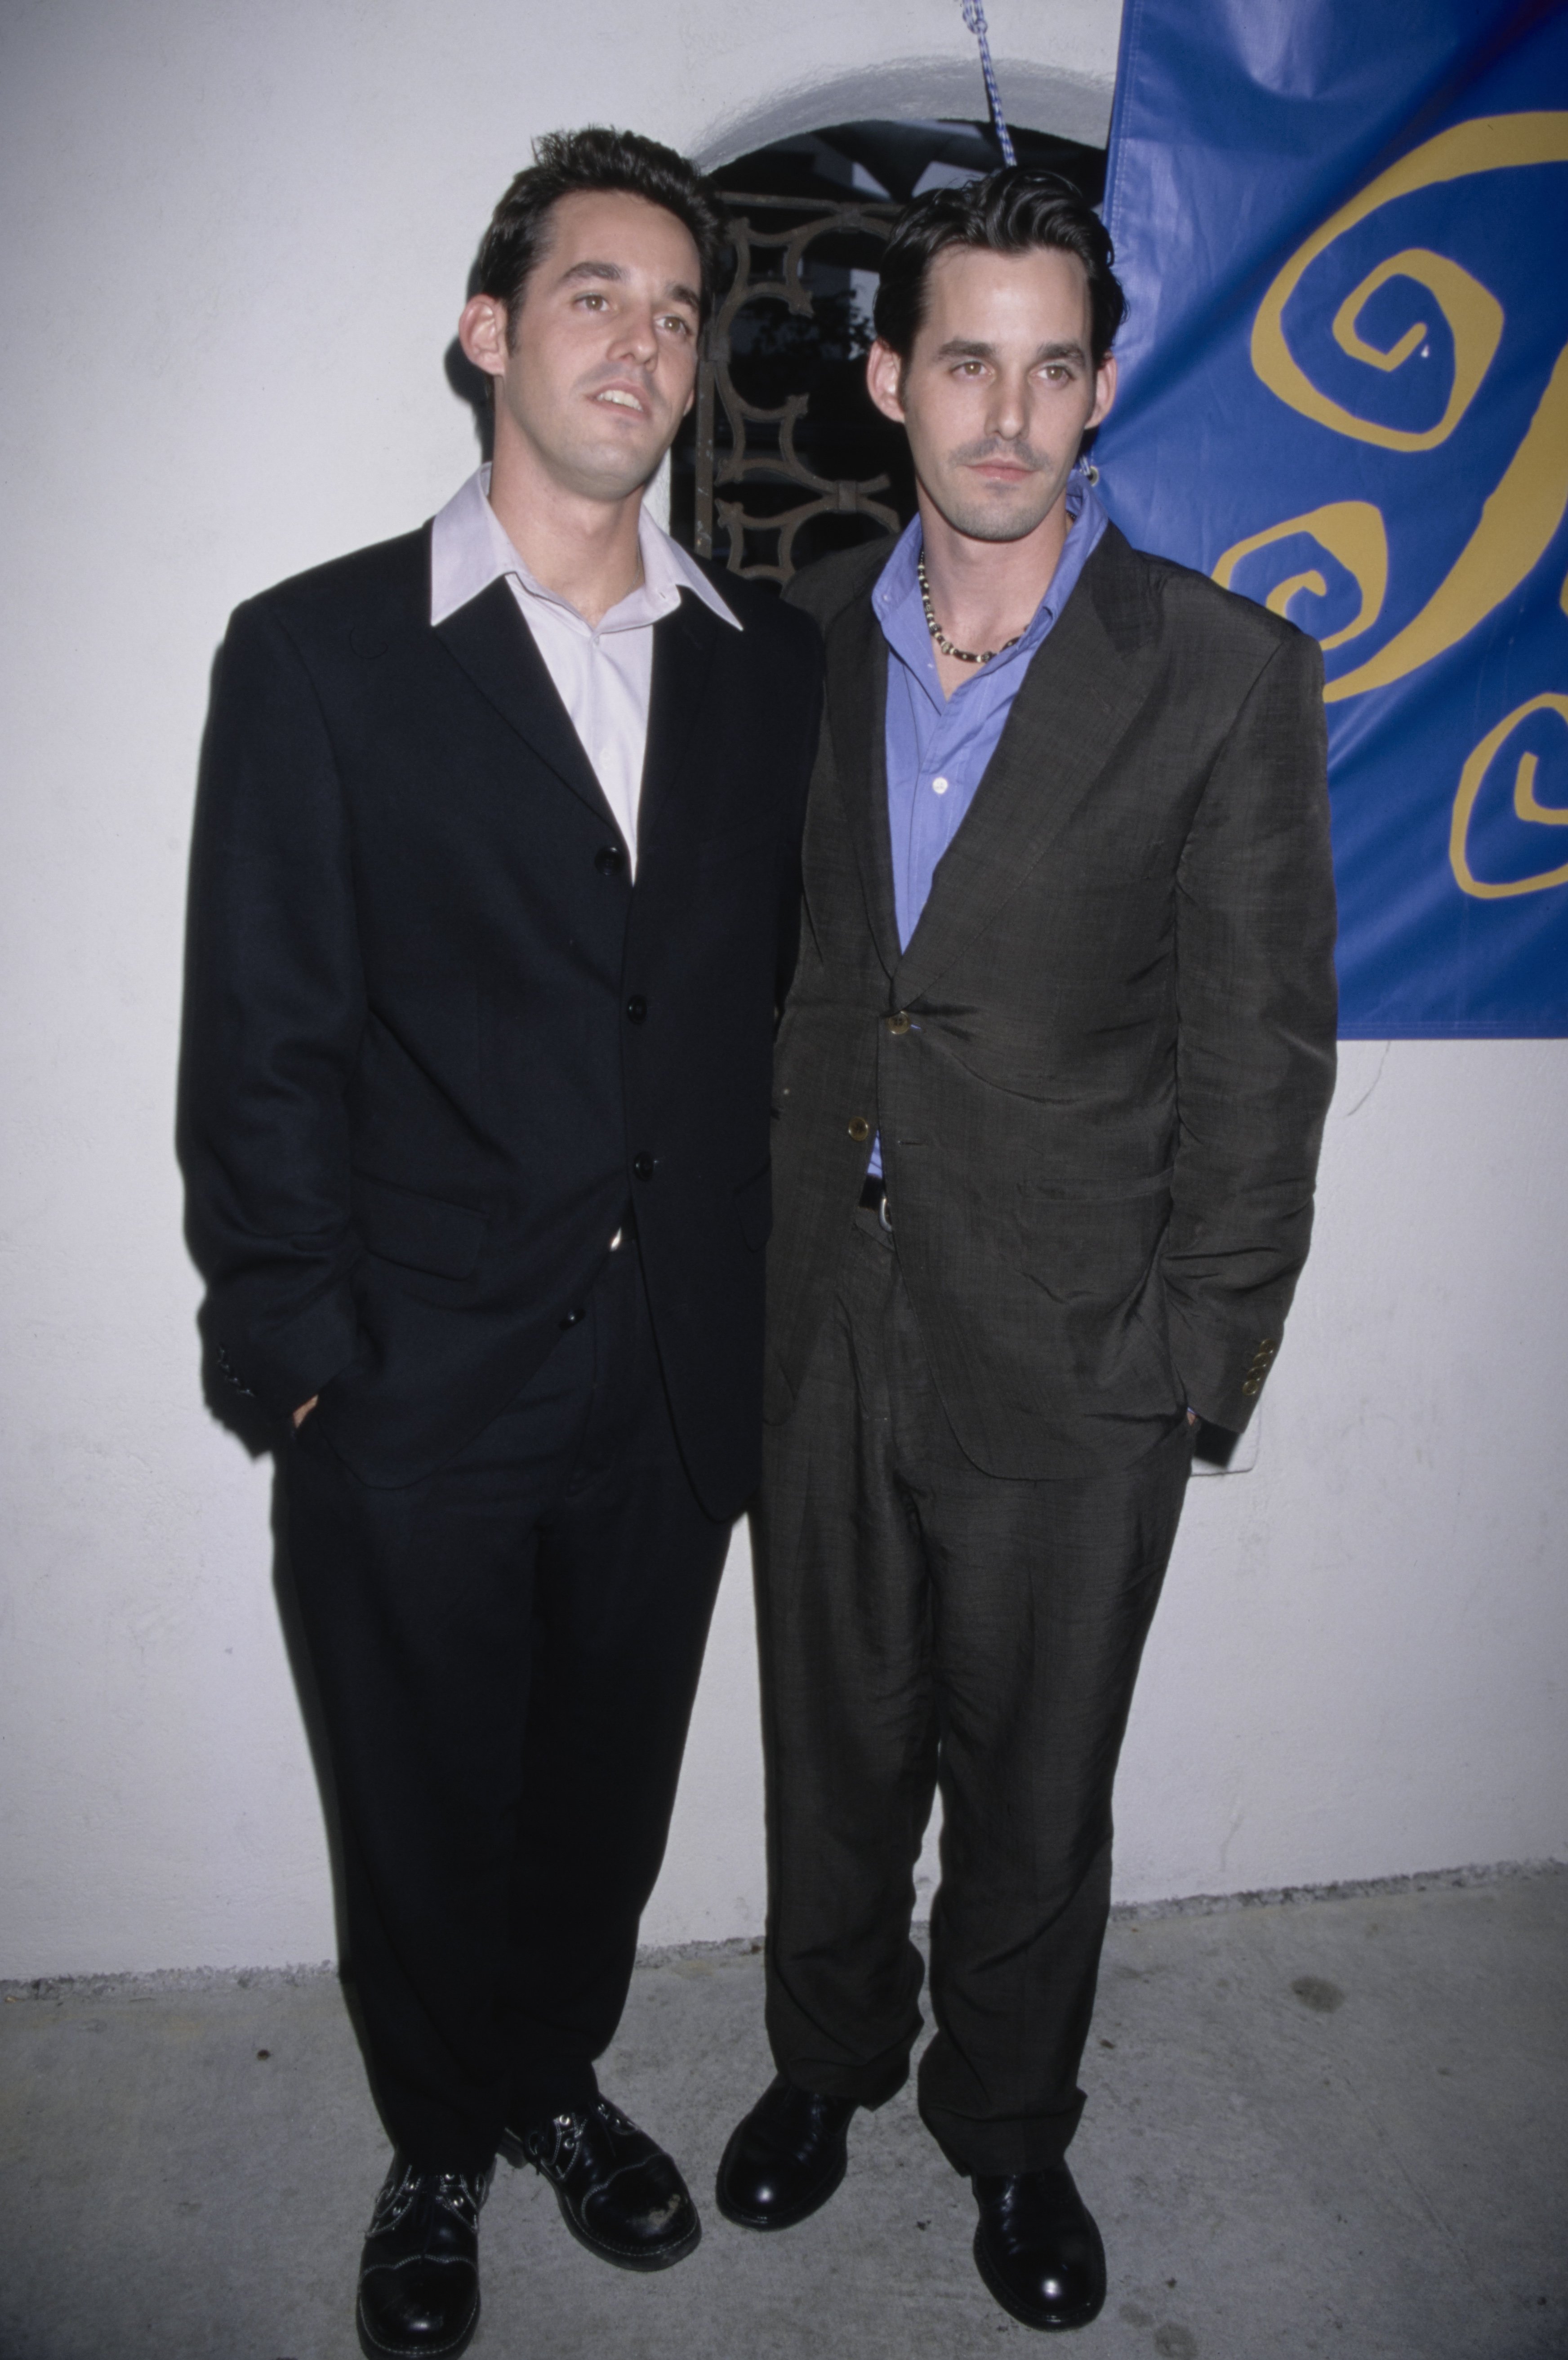 Nicholas Brendon and Kelly Donovan attend The WB Television Network Affiliates Convention, held at the Pasadena Civic Auditorium in Pasadena, California, on July 24, 1998 | Source: Getty Images